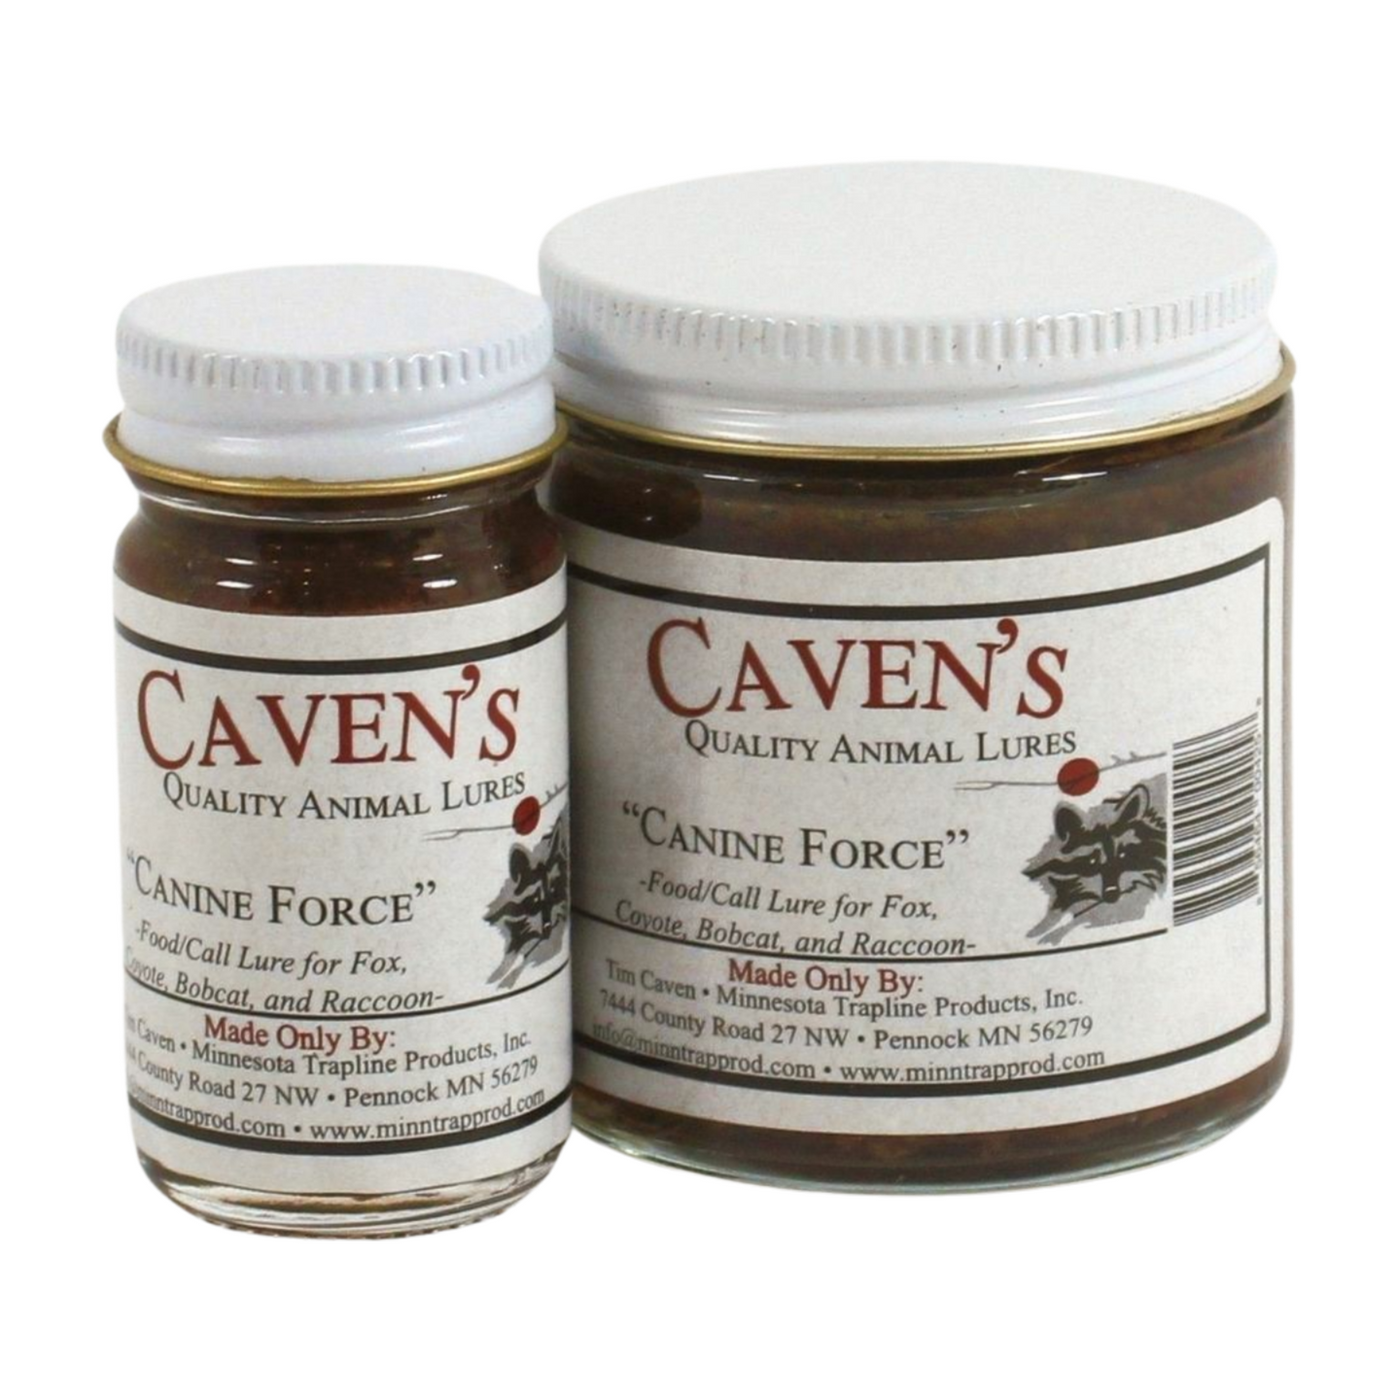 Caven's Canine Force - Canine Food and Call Lure